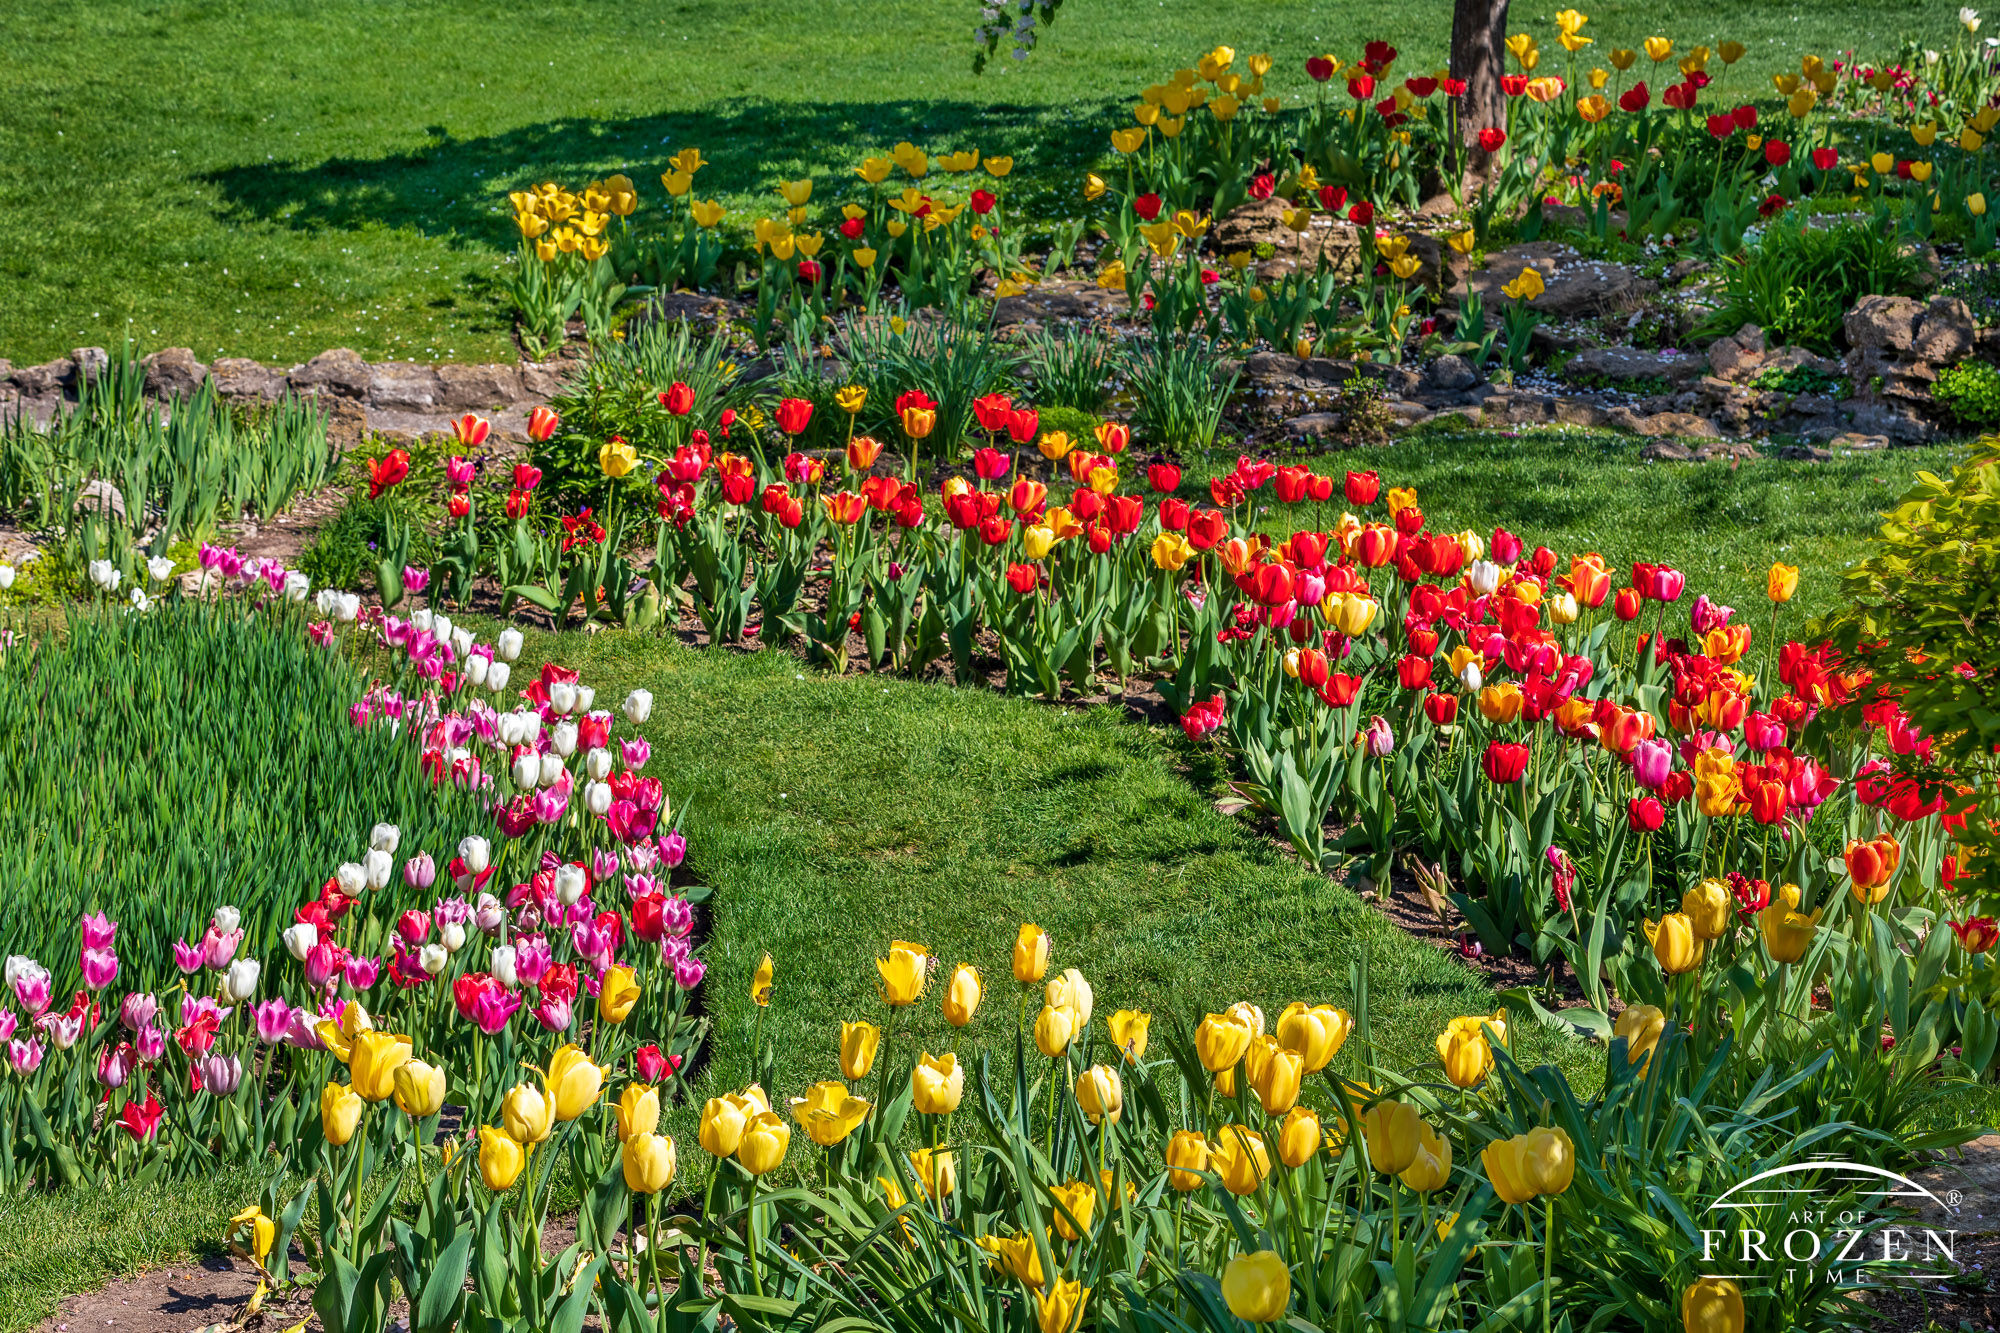 Flowerbeds of tulips stretch all over Oakwood Ohio’s Smith Memorial Gardens under sunny skies